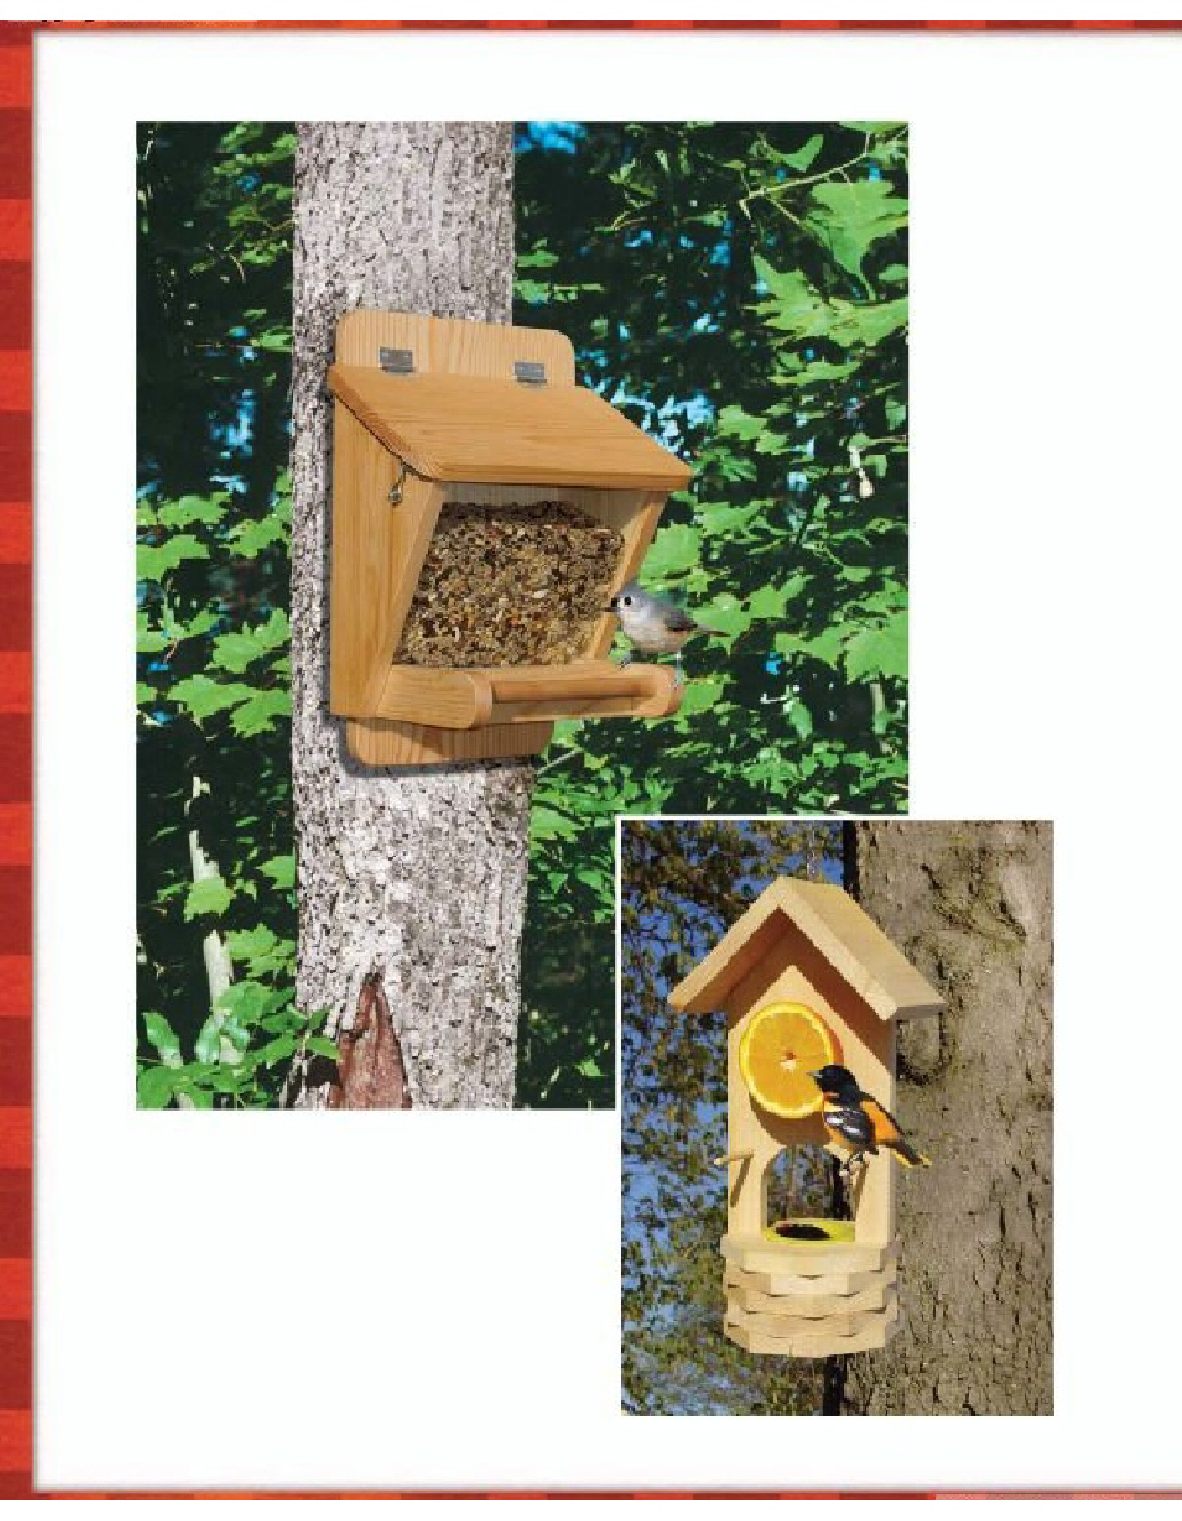 Bird-Friendly Nest Boxes and Feeders 12 Easy-To-Build Designs that Attract Birds to Your Yard